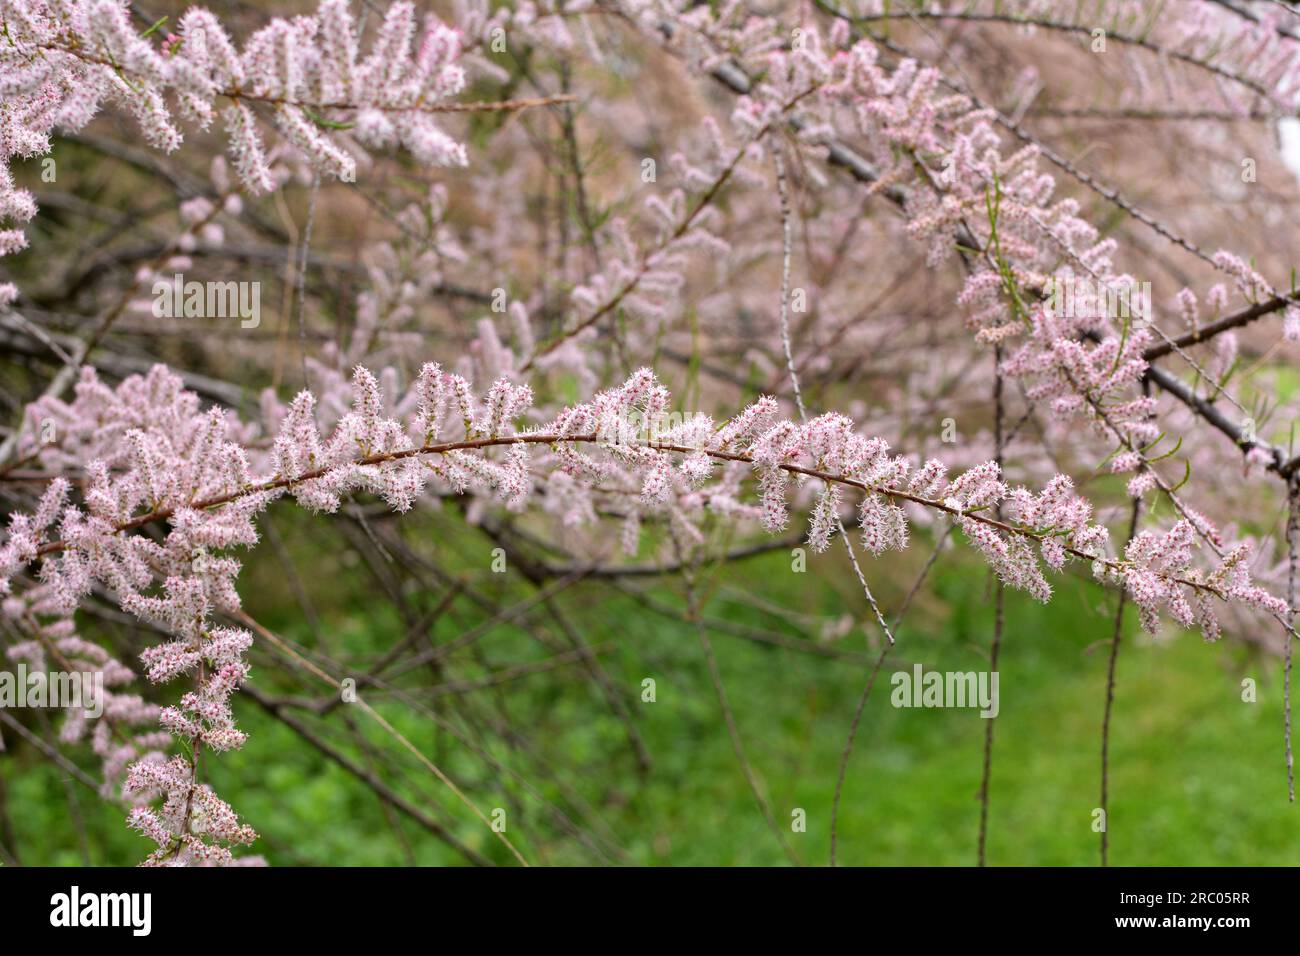 In spring, the ornamental plant tamarix grows in nature Stock Photo